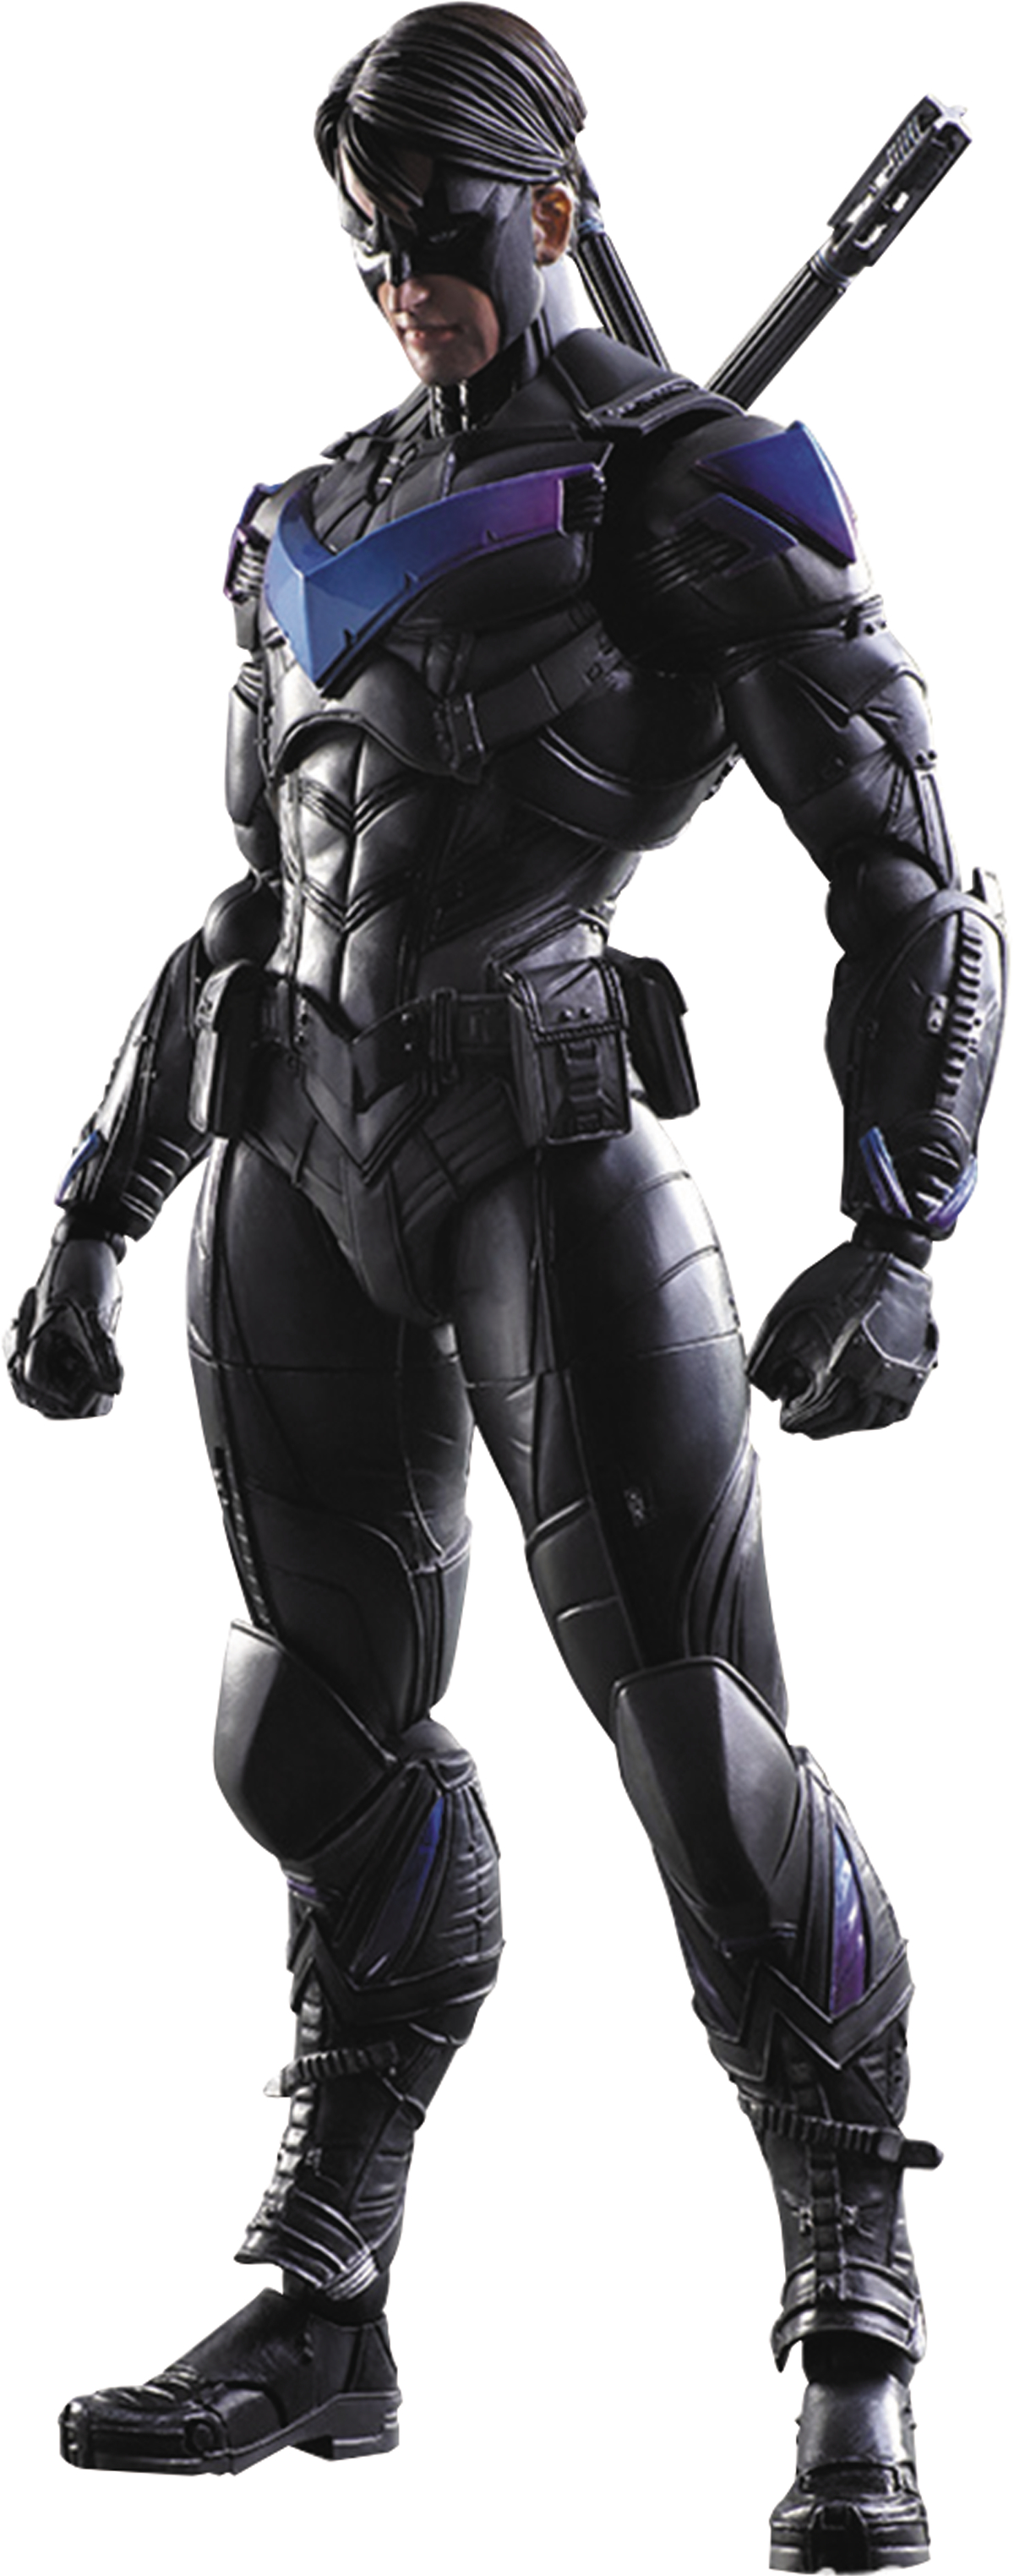 War Machine Soars With A New Play Arts Kai Figure - Previews World